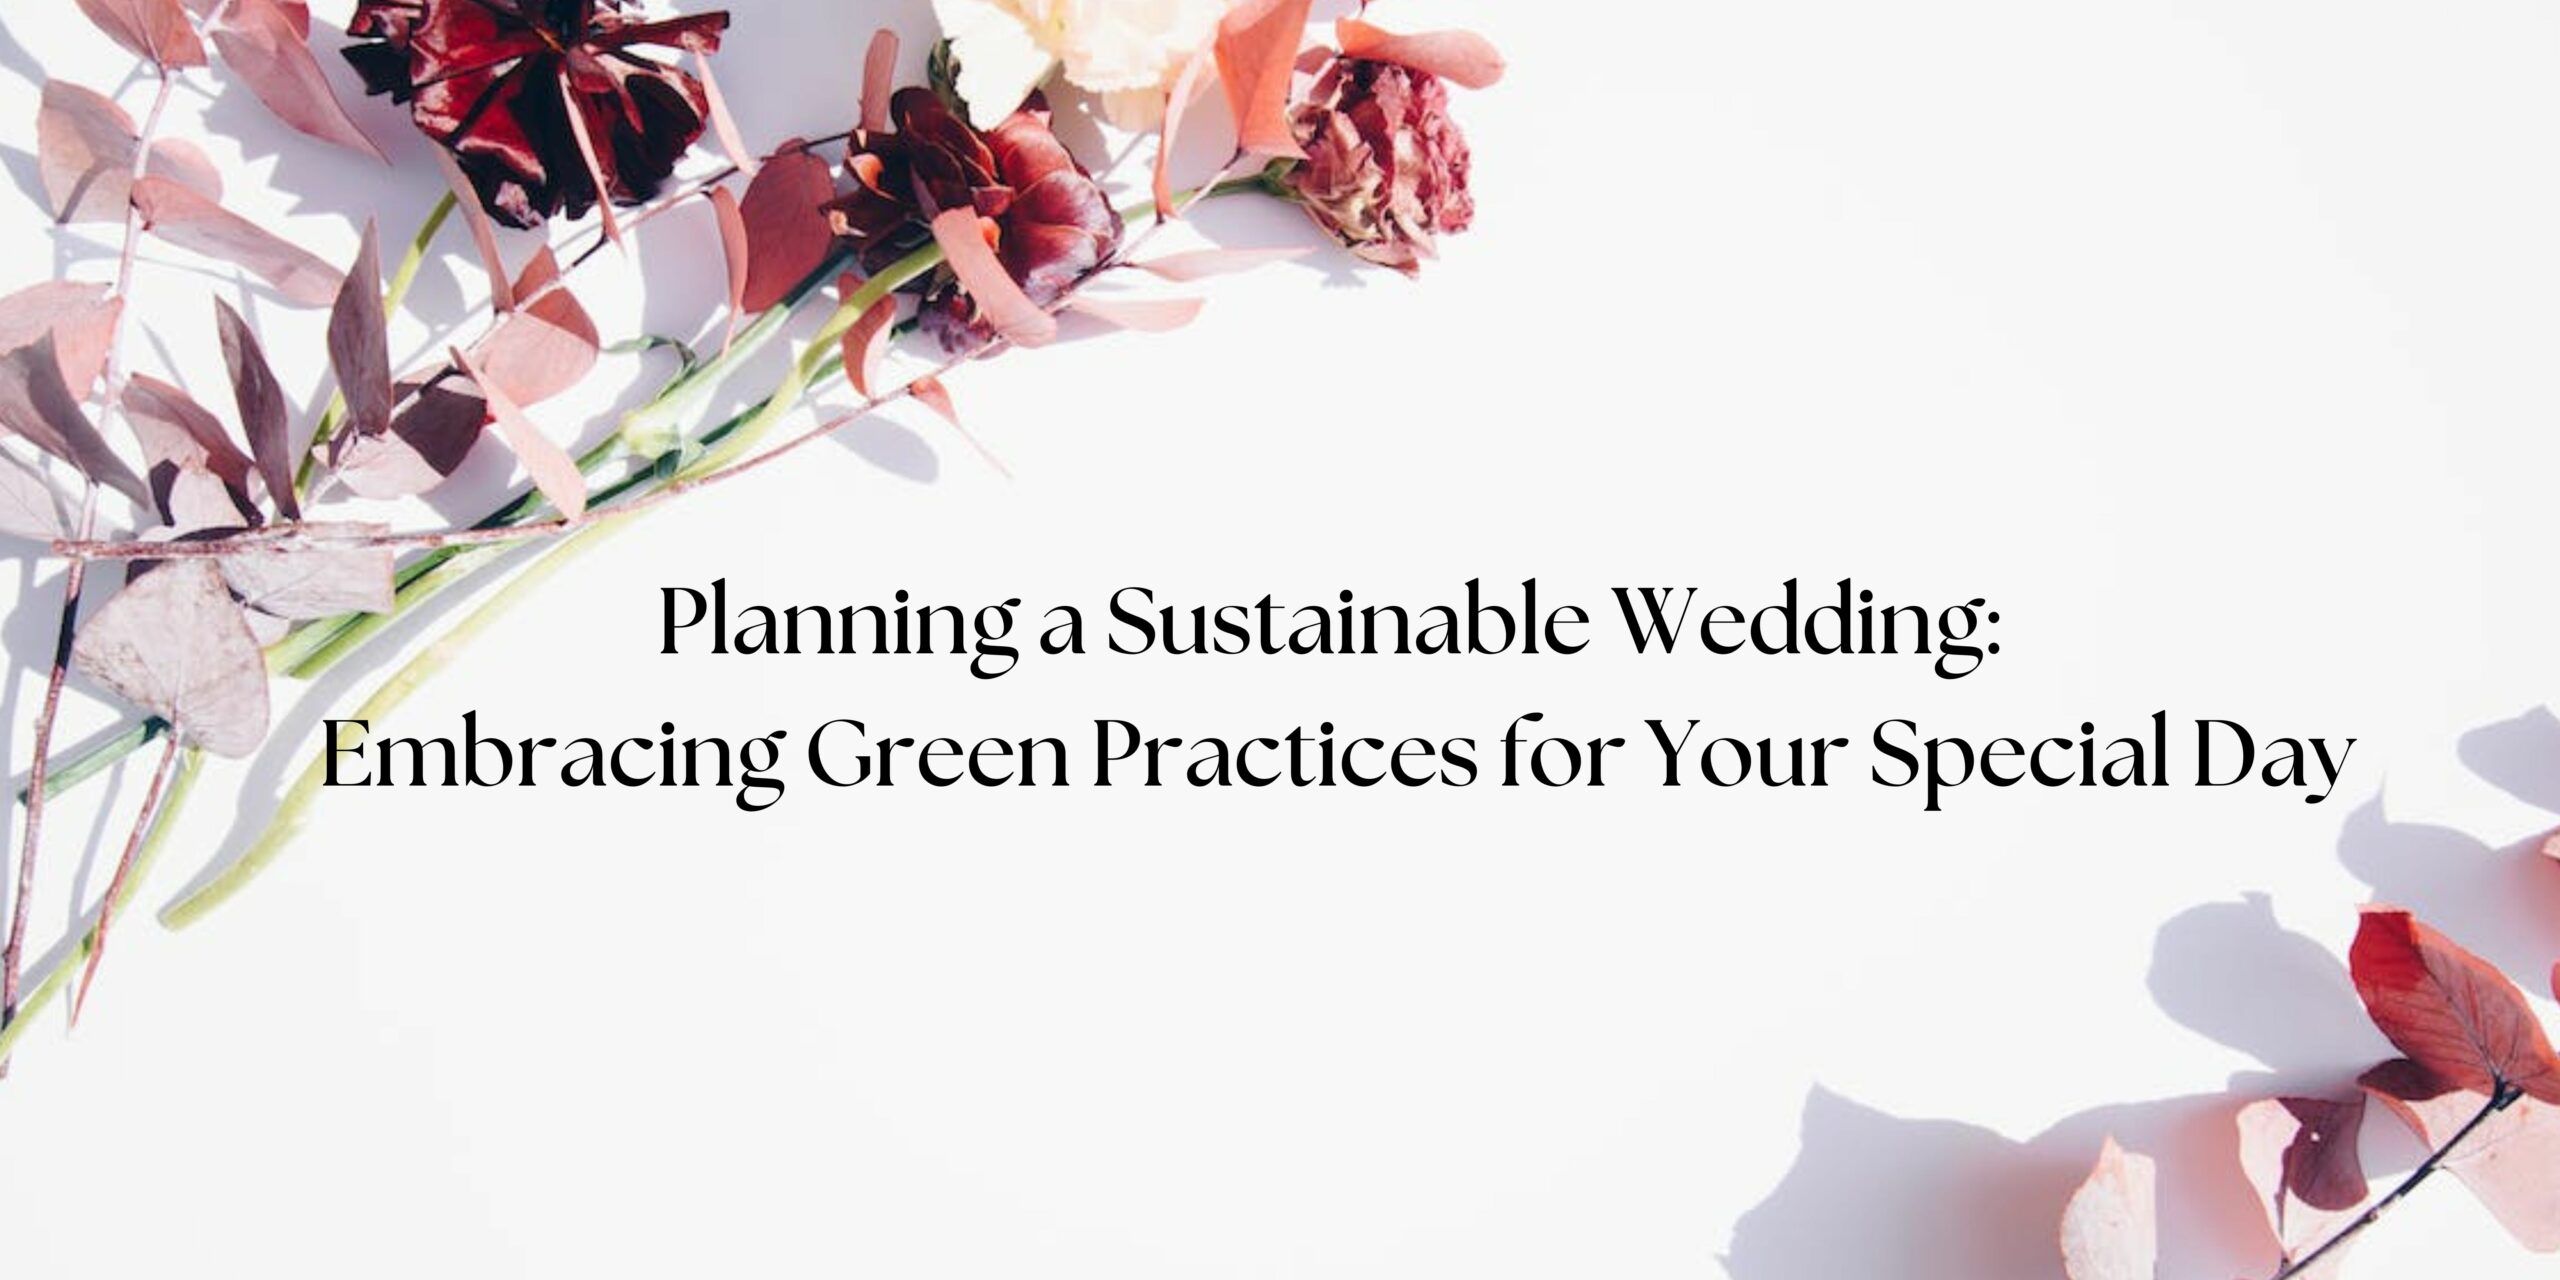 Planning a Sustainable wedding